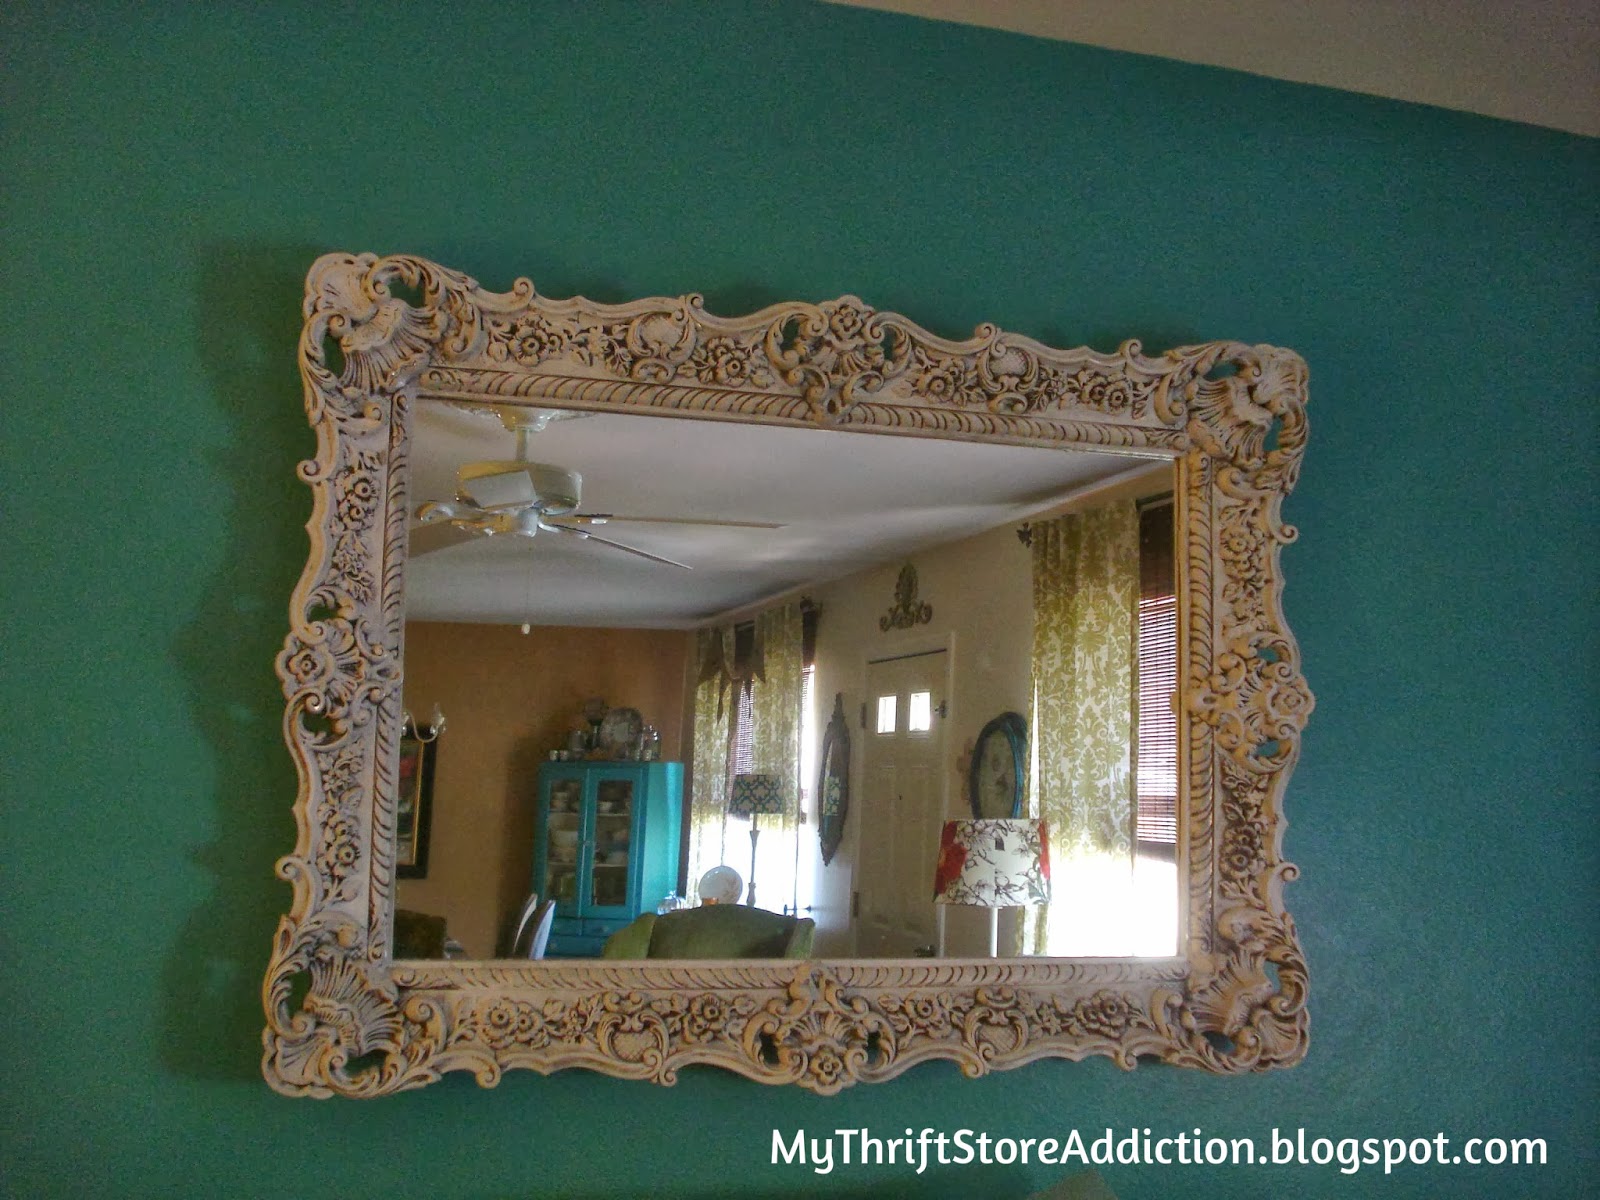 Upcycled thrift store mirror